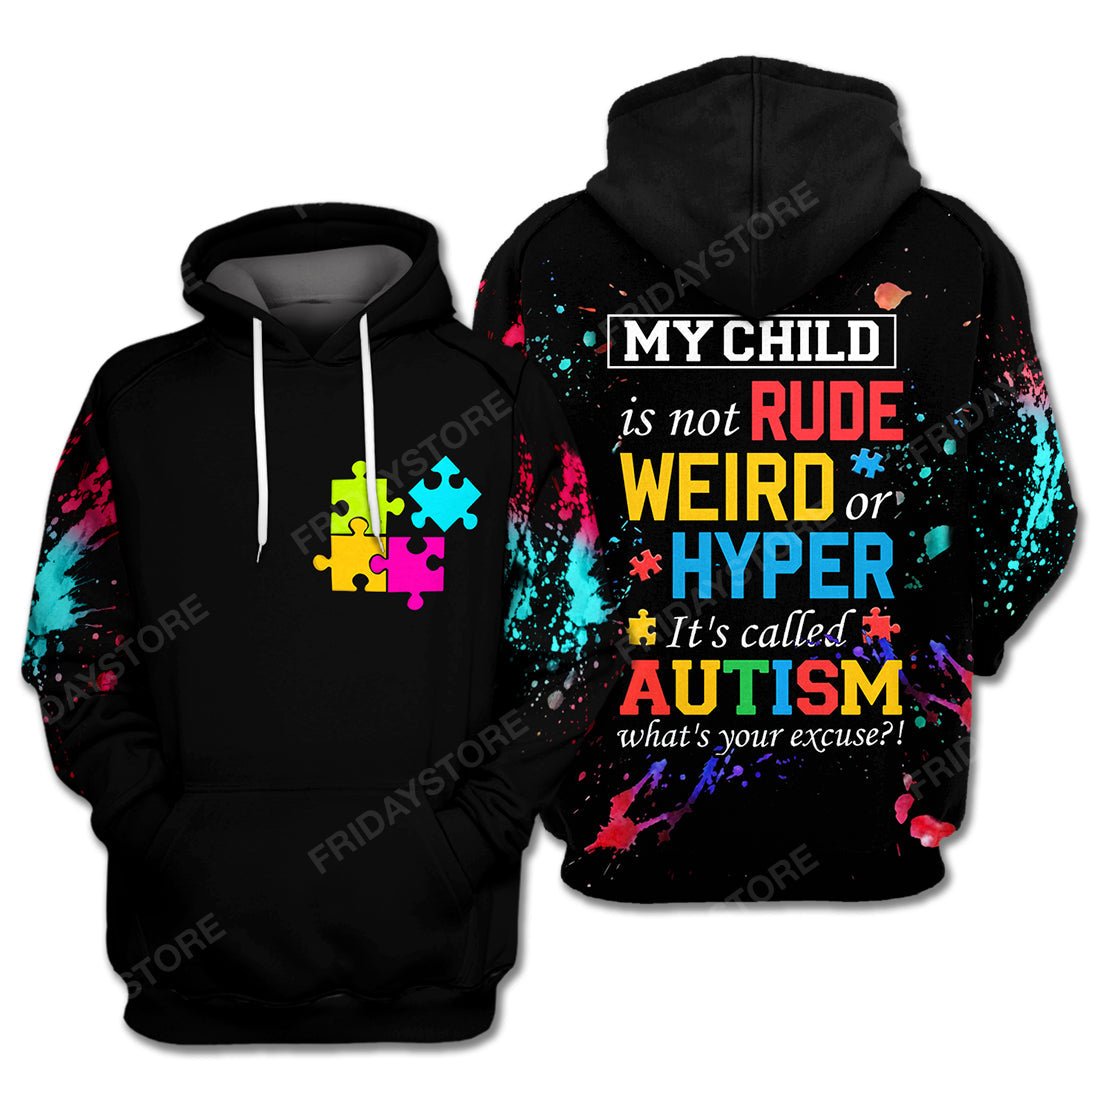 Unifinz Autism T-shirt My Child Is Not Rude Weird Or Hyper T-shirt Autism Hoodie Autism Apparel 2022